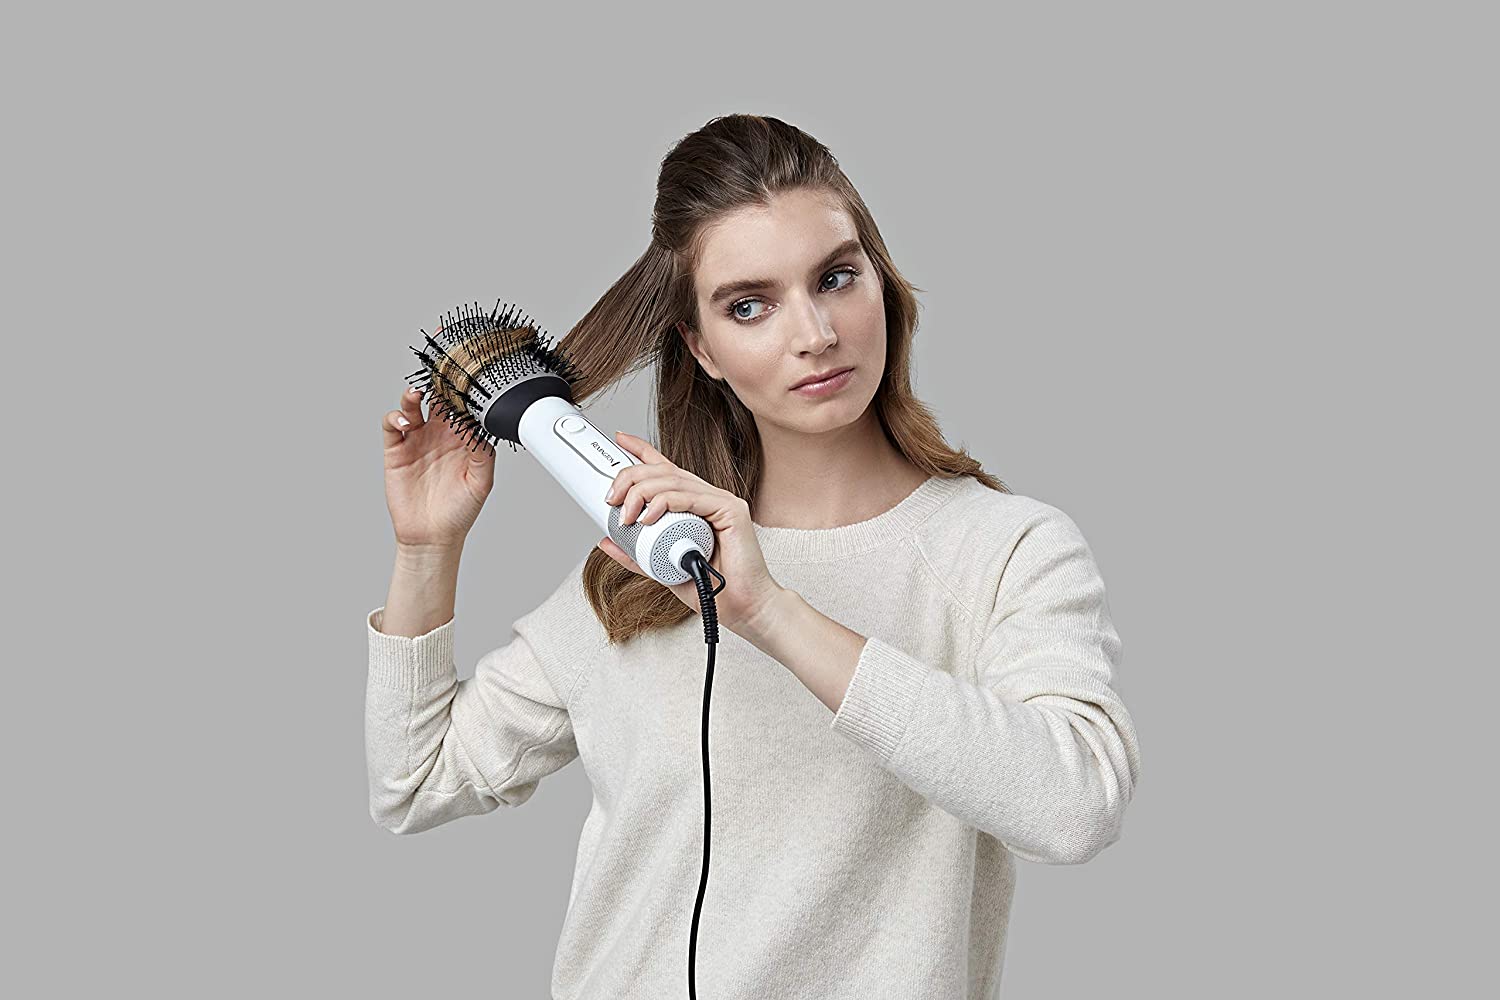 Remington Warm Air Brush Ion Hydraluxe 2in1: Hair Dryer & Volume Brush AS8901